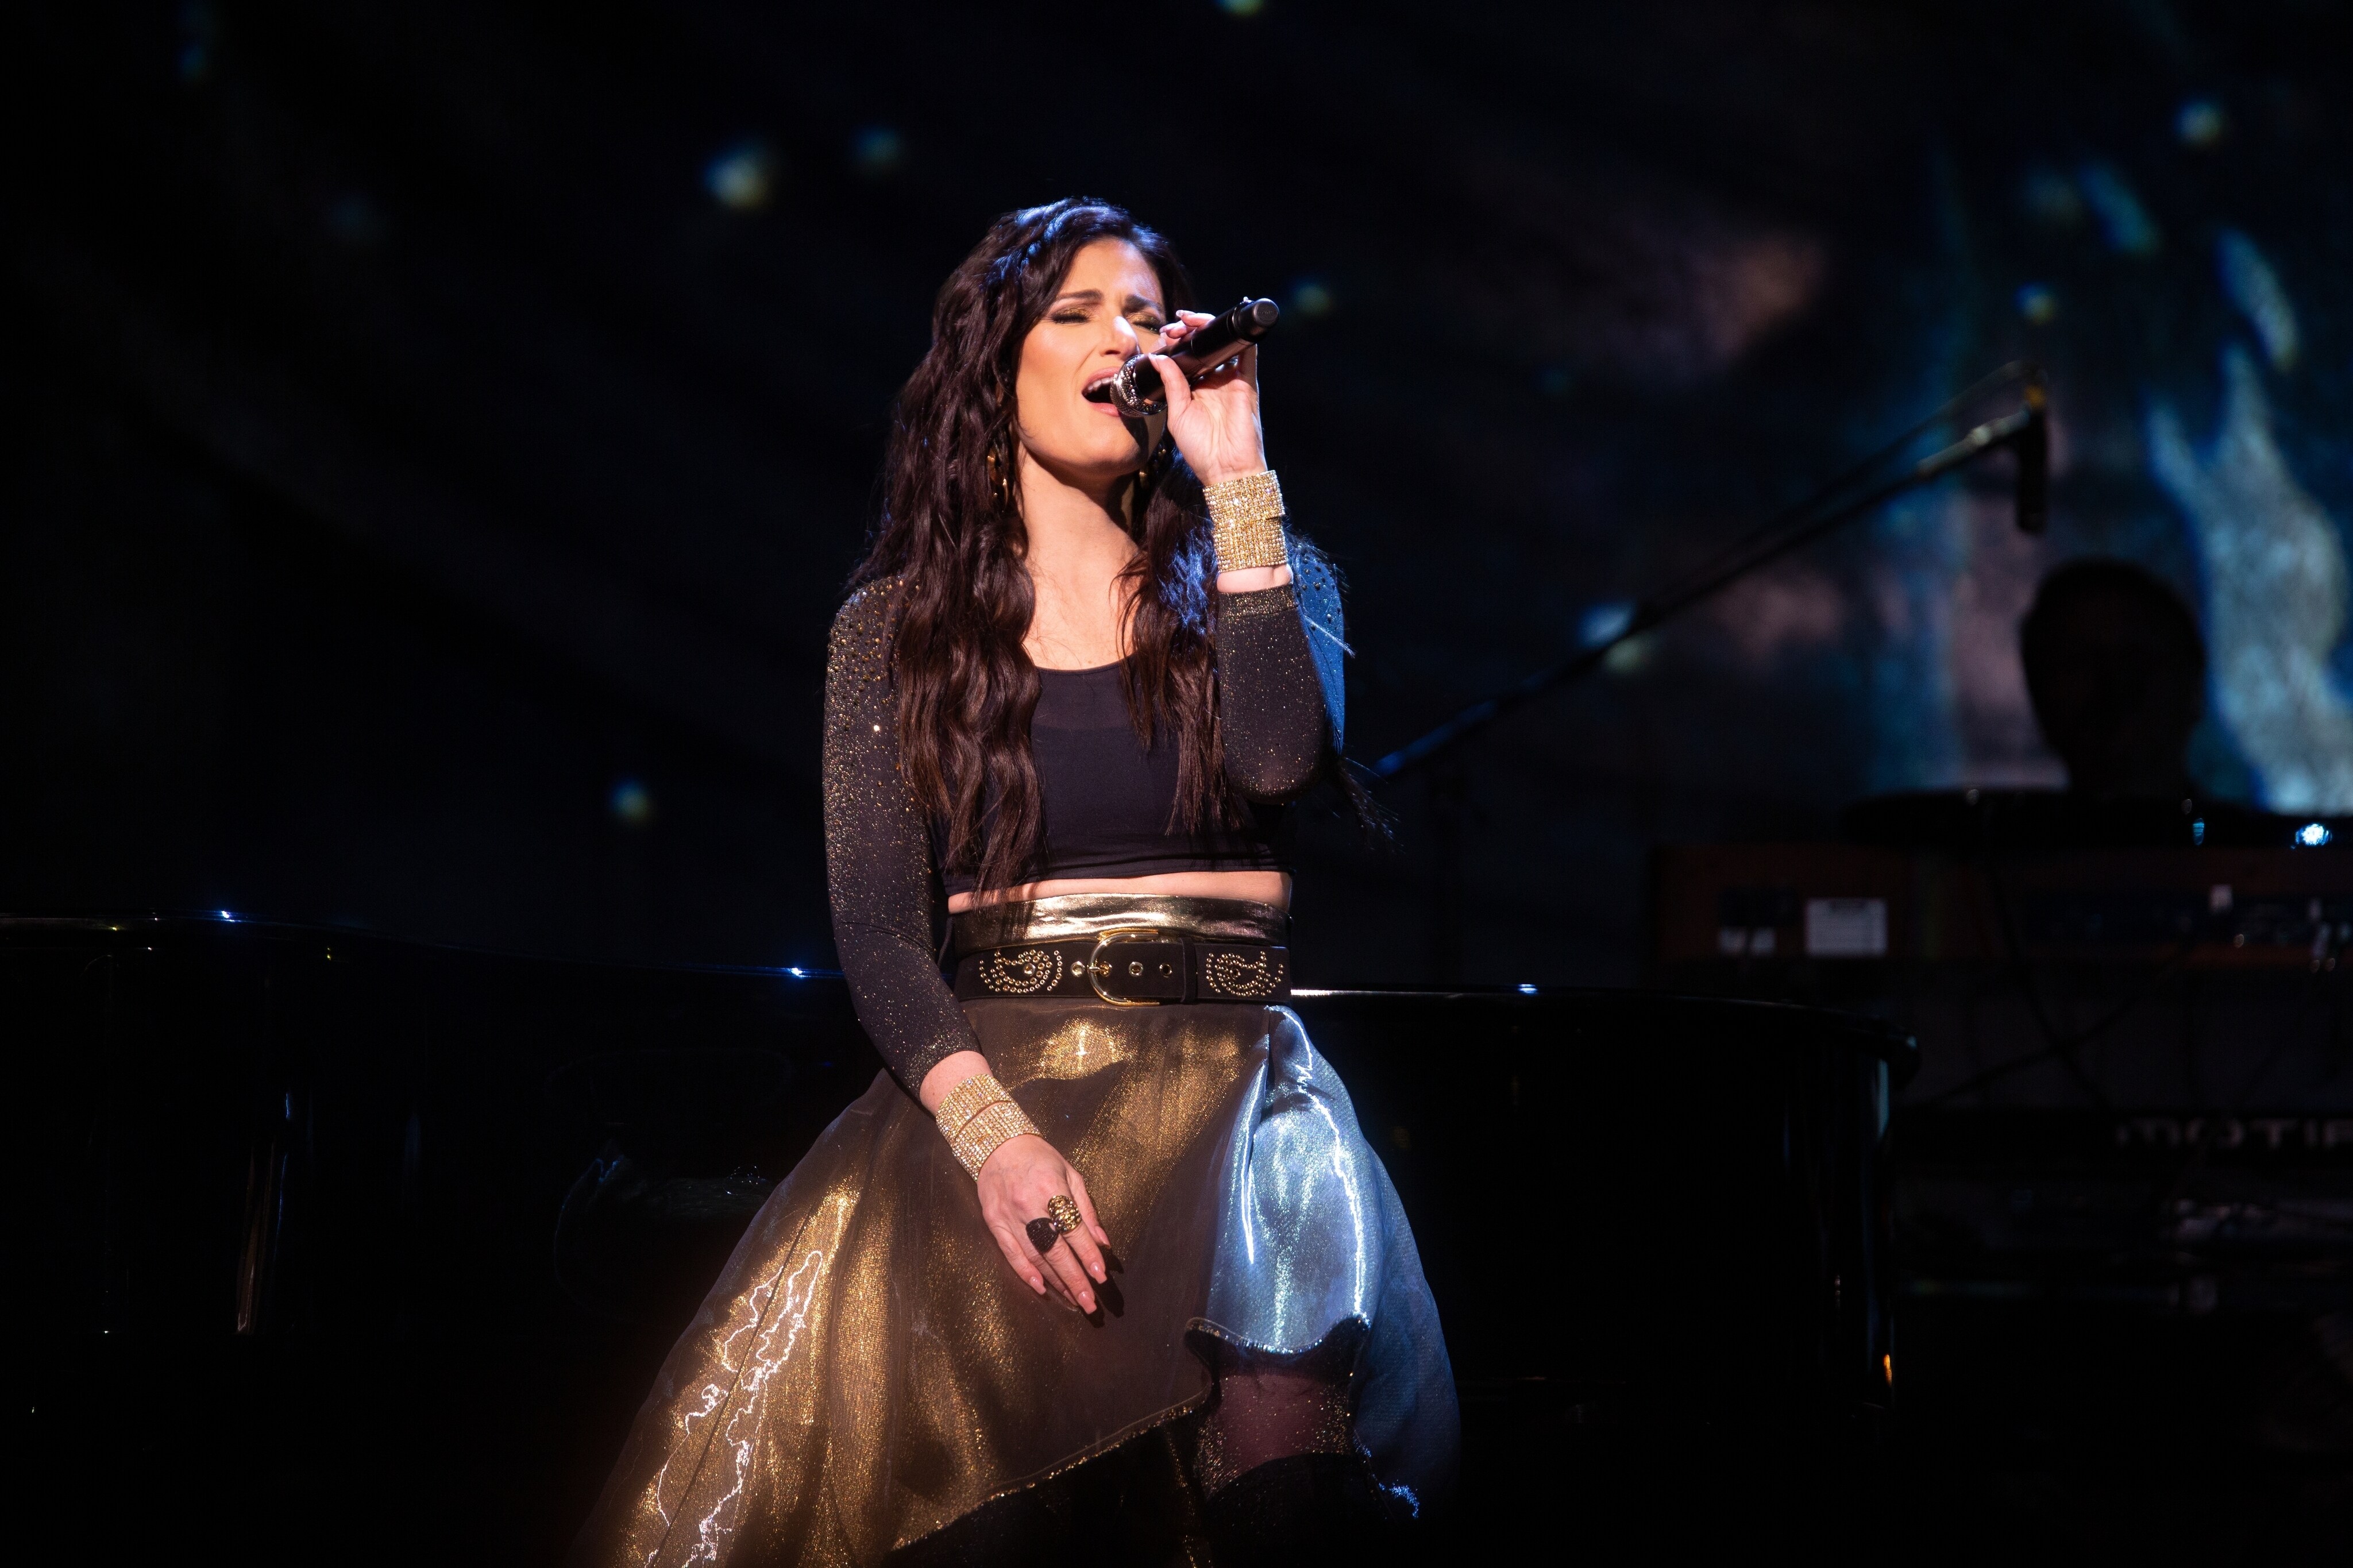 Idina Menzel sings on stage